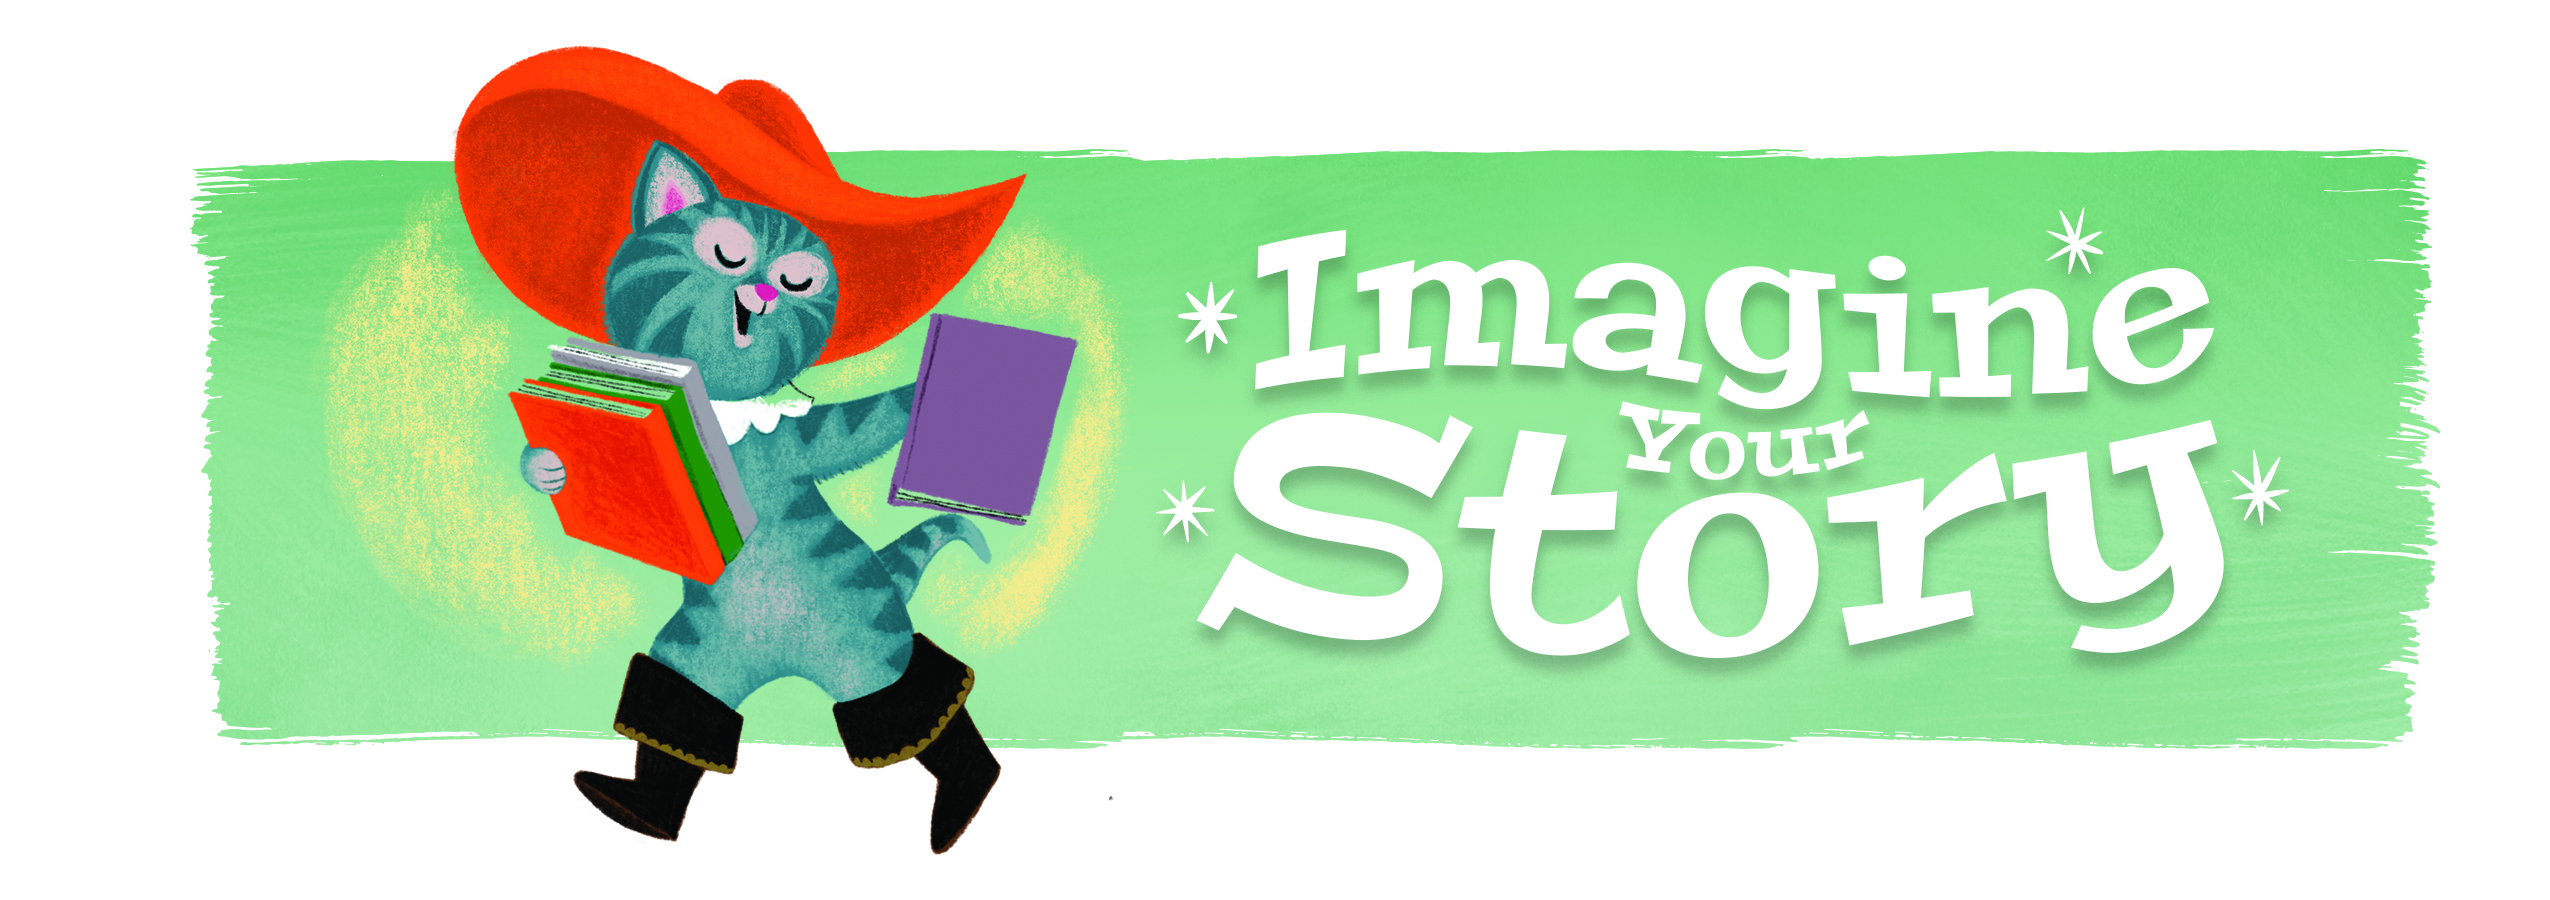 Imagine Your Story Kids Banner Copy Wayland Free Public Library